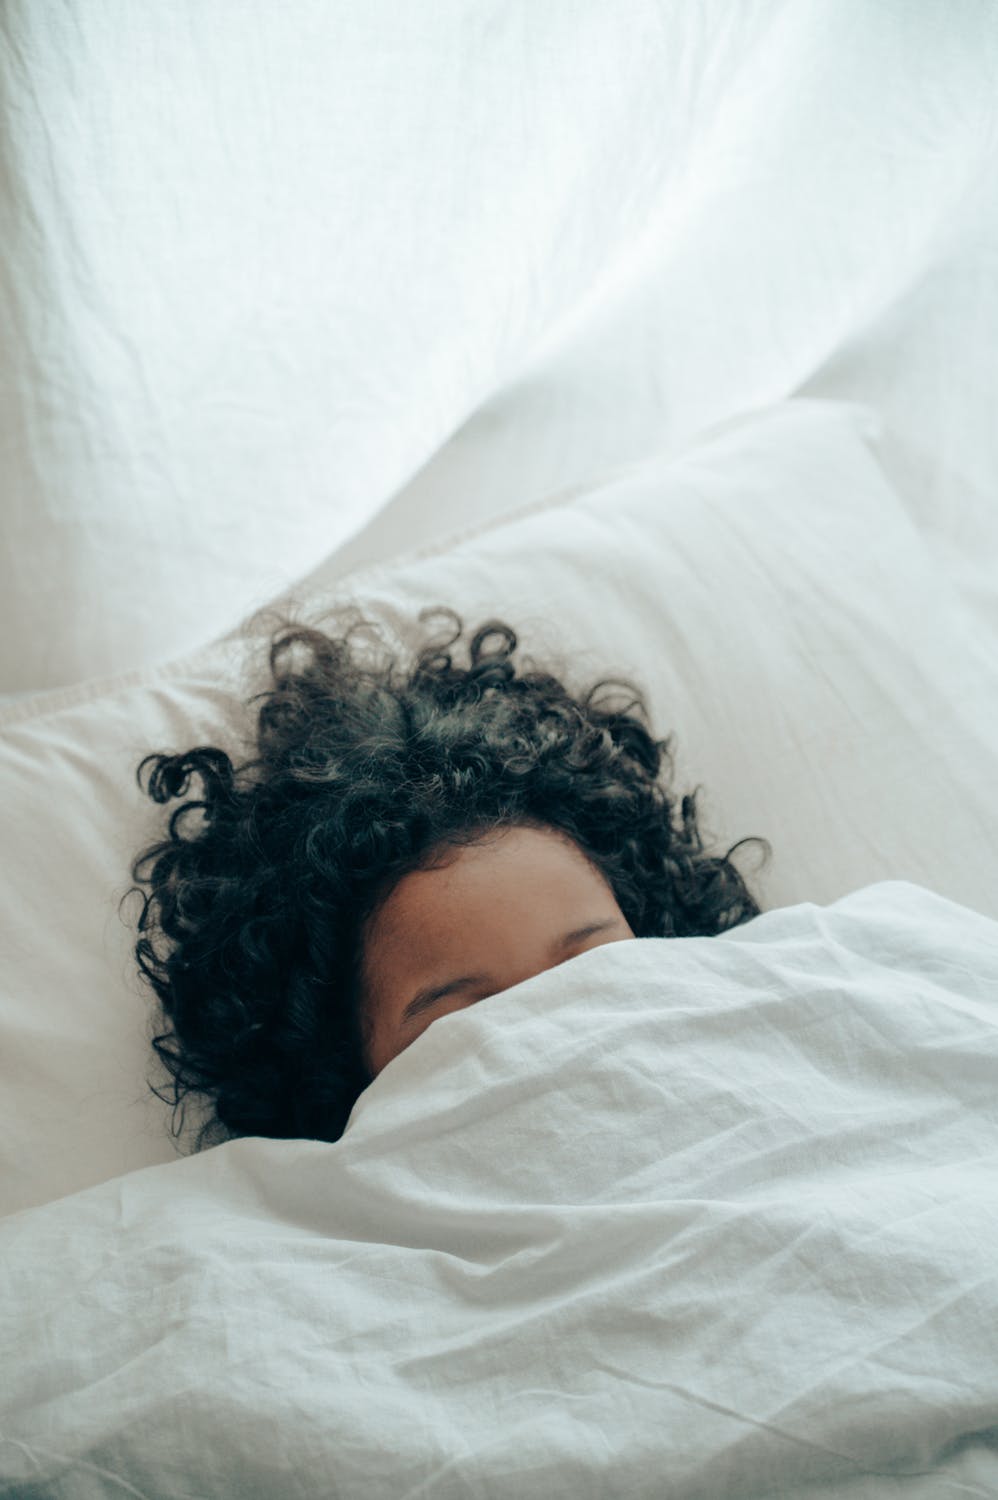 Here's Why Sleep is More Important Than You May Think